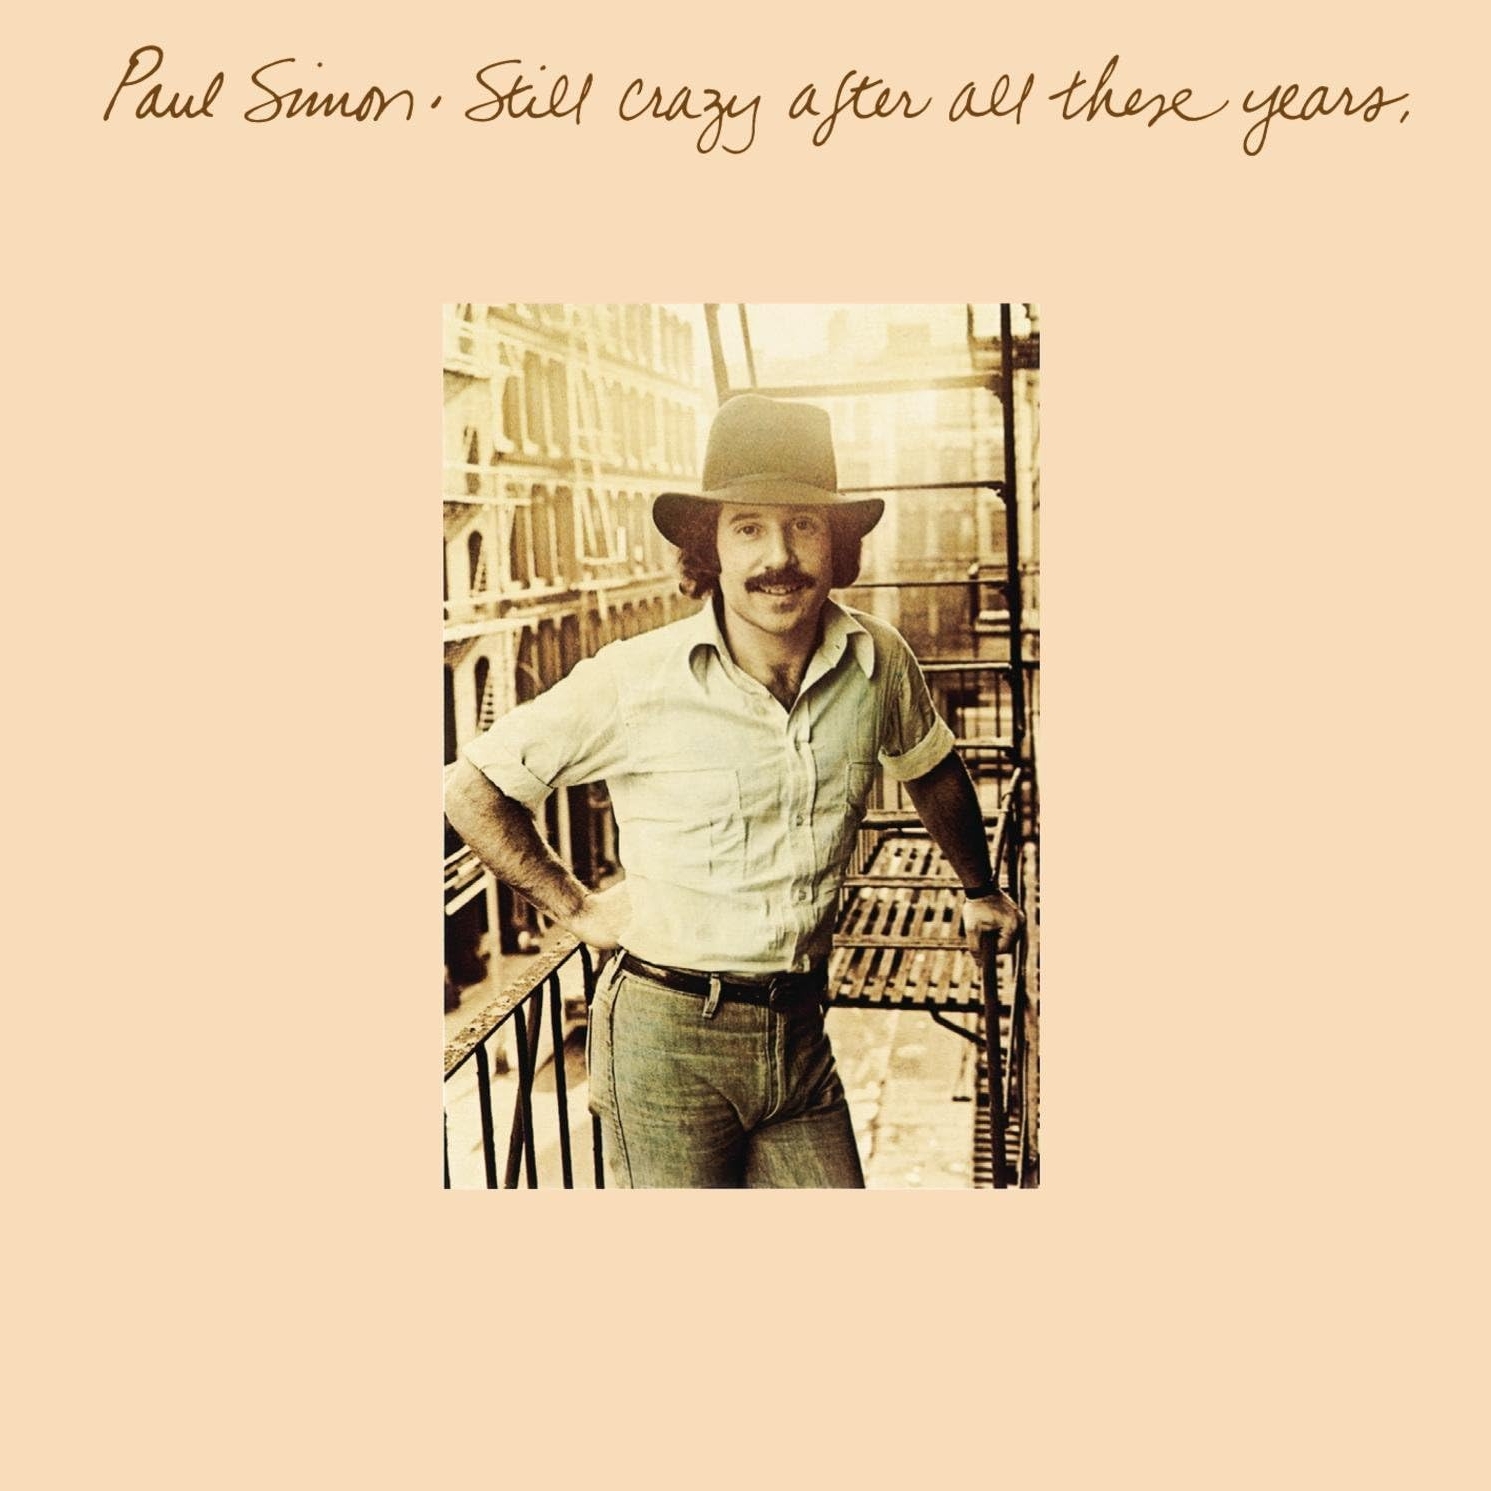 audio review : Still Crazy After All These Years ( album ) ... Paul Simon